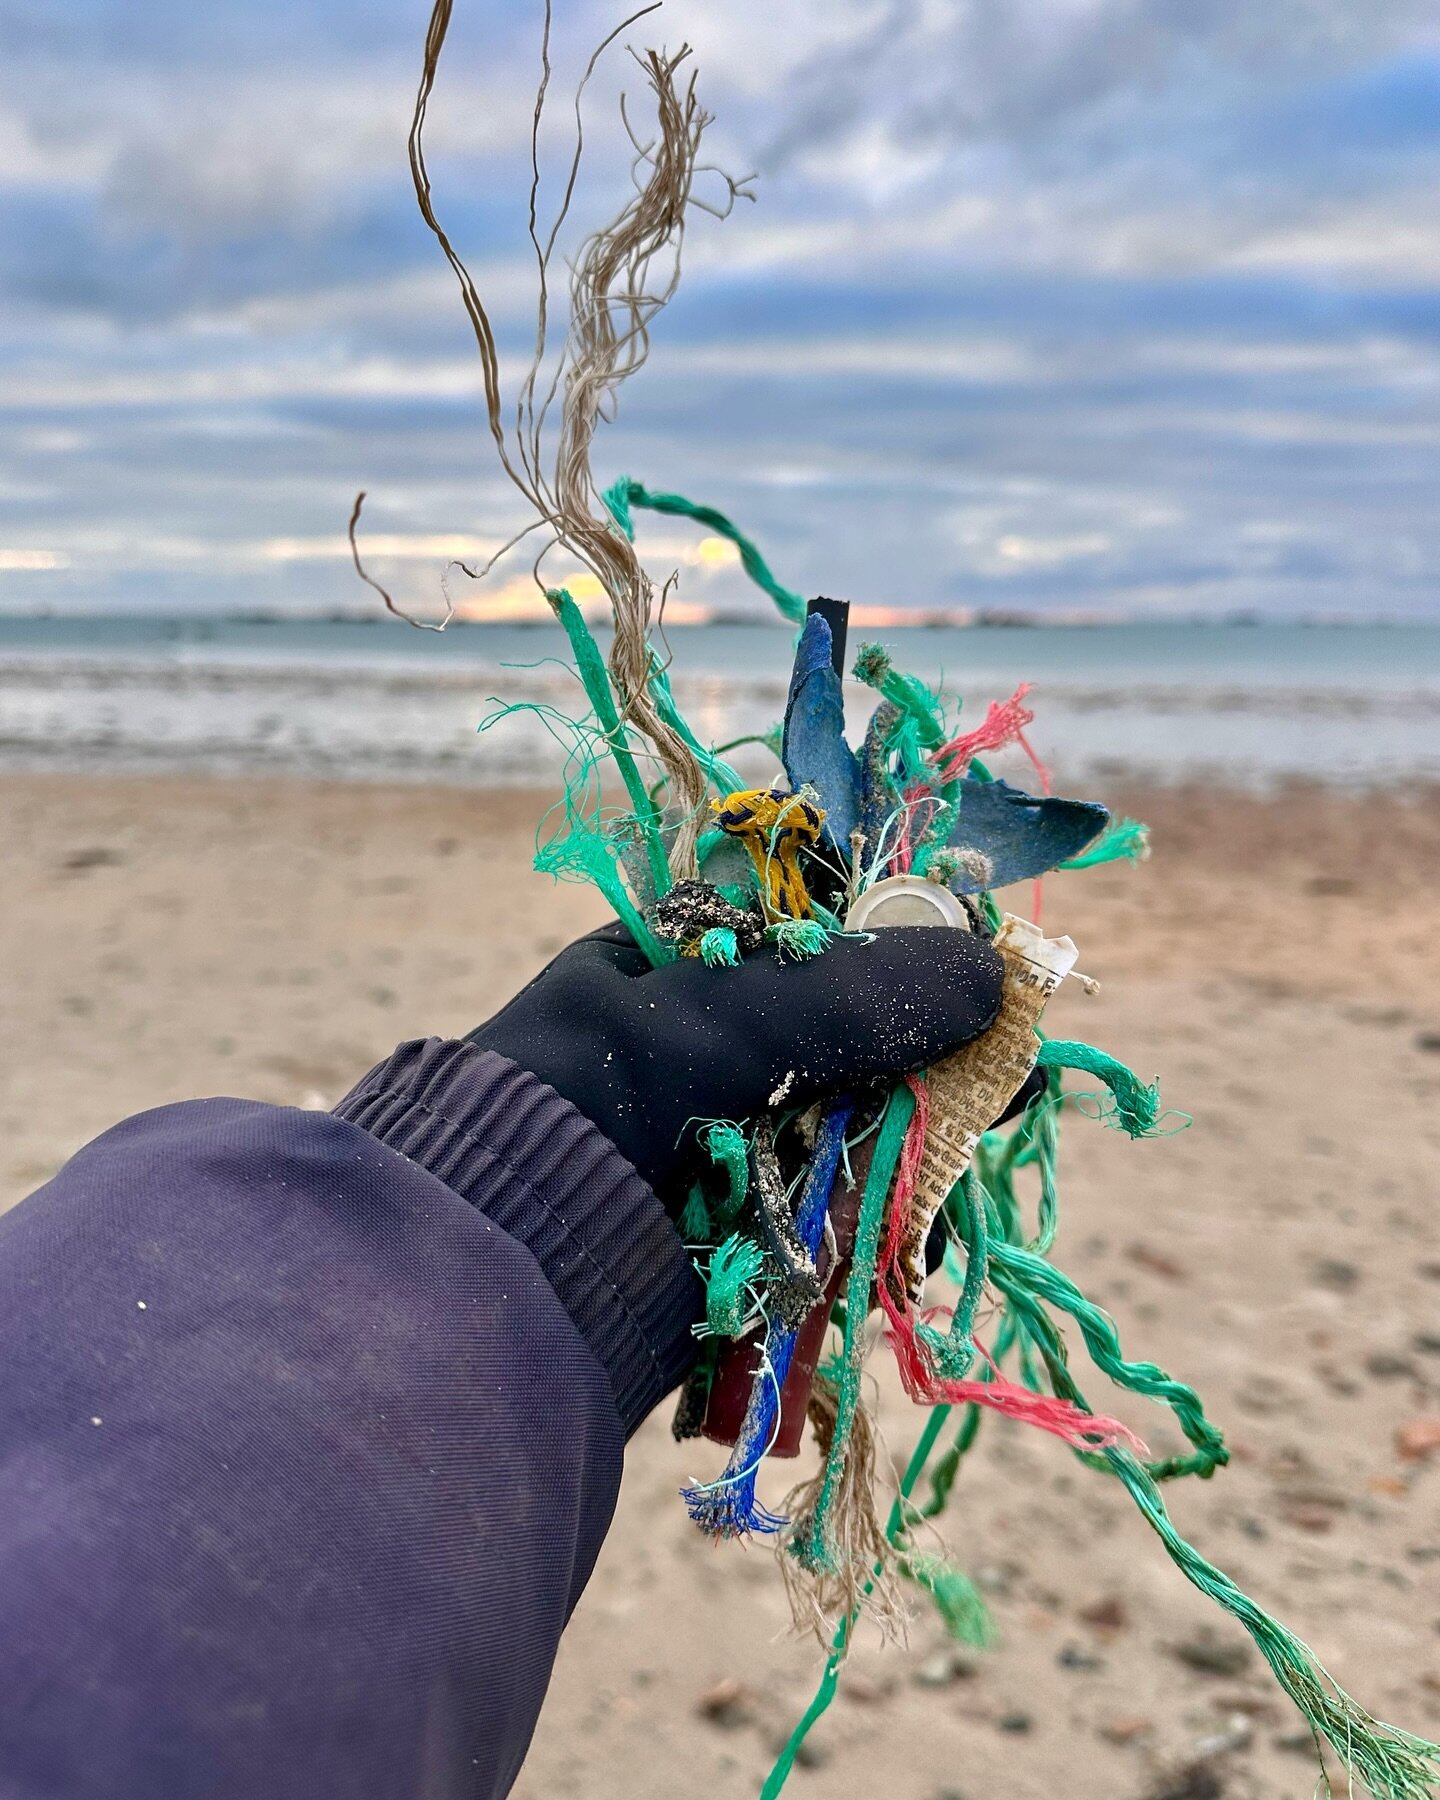 Disruptors! Be a handful!  Be the change, however small. 

Todays walk on the beach at La Mare resulted in a handful of plastics - fishing rope, bottle tops, yoghurt pot, sweetie wrappers, shotgun wad, cigarillo filter and random plastics.

Not much,